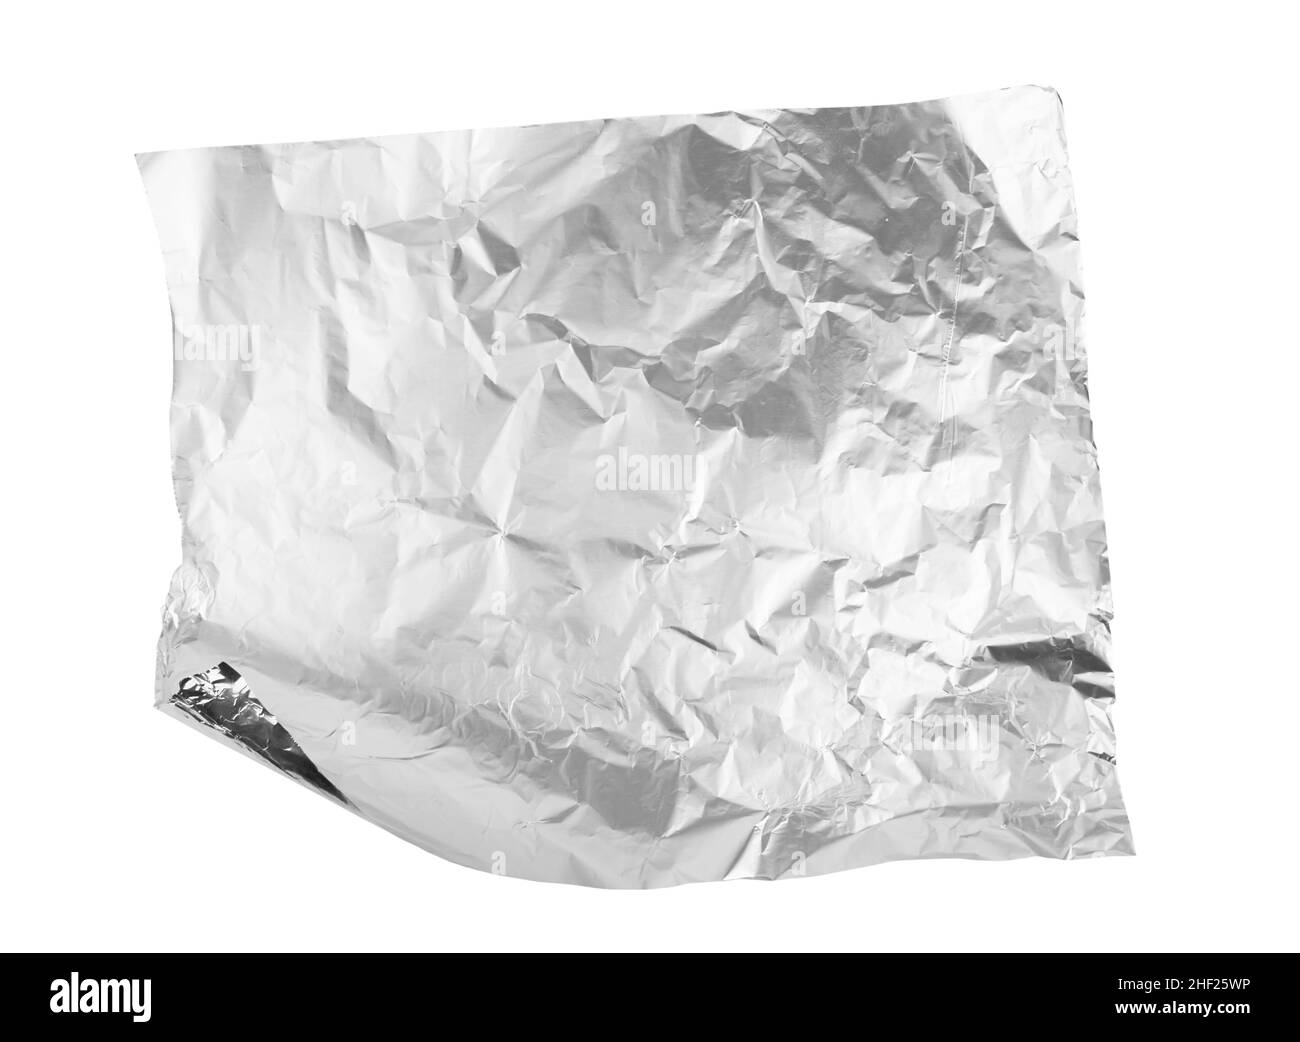 A piece of an aluminum foil on white background Stock Photo